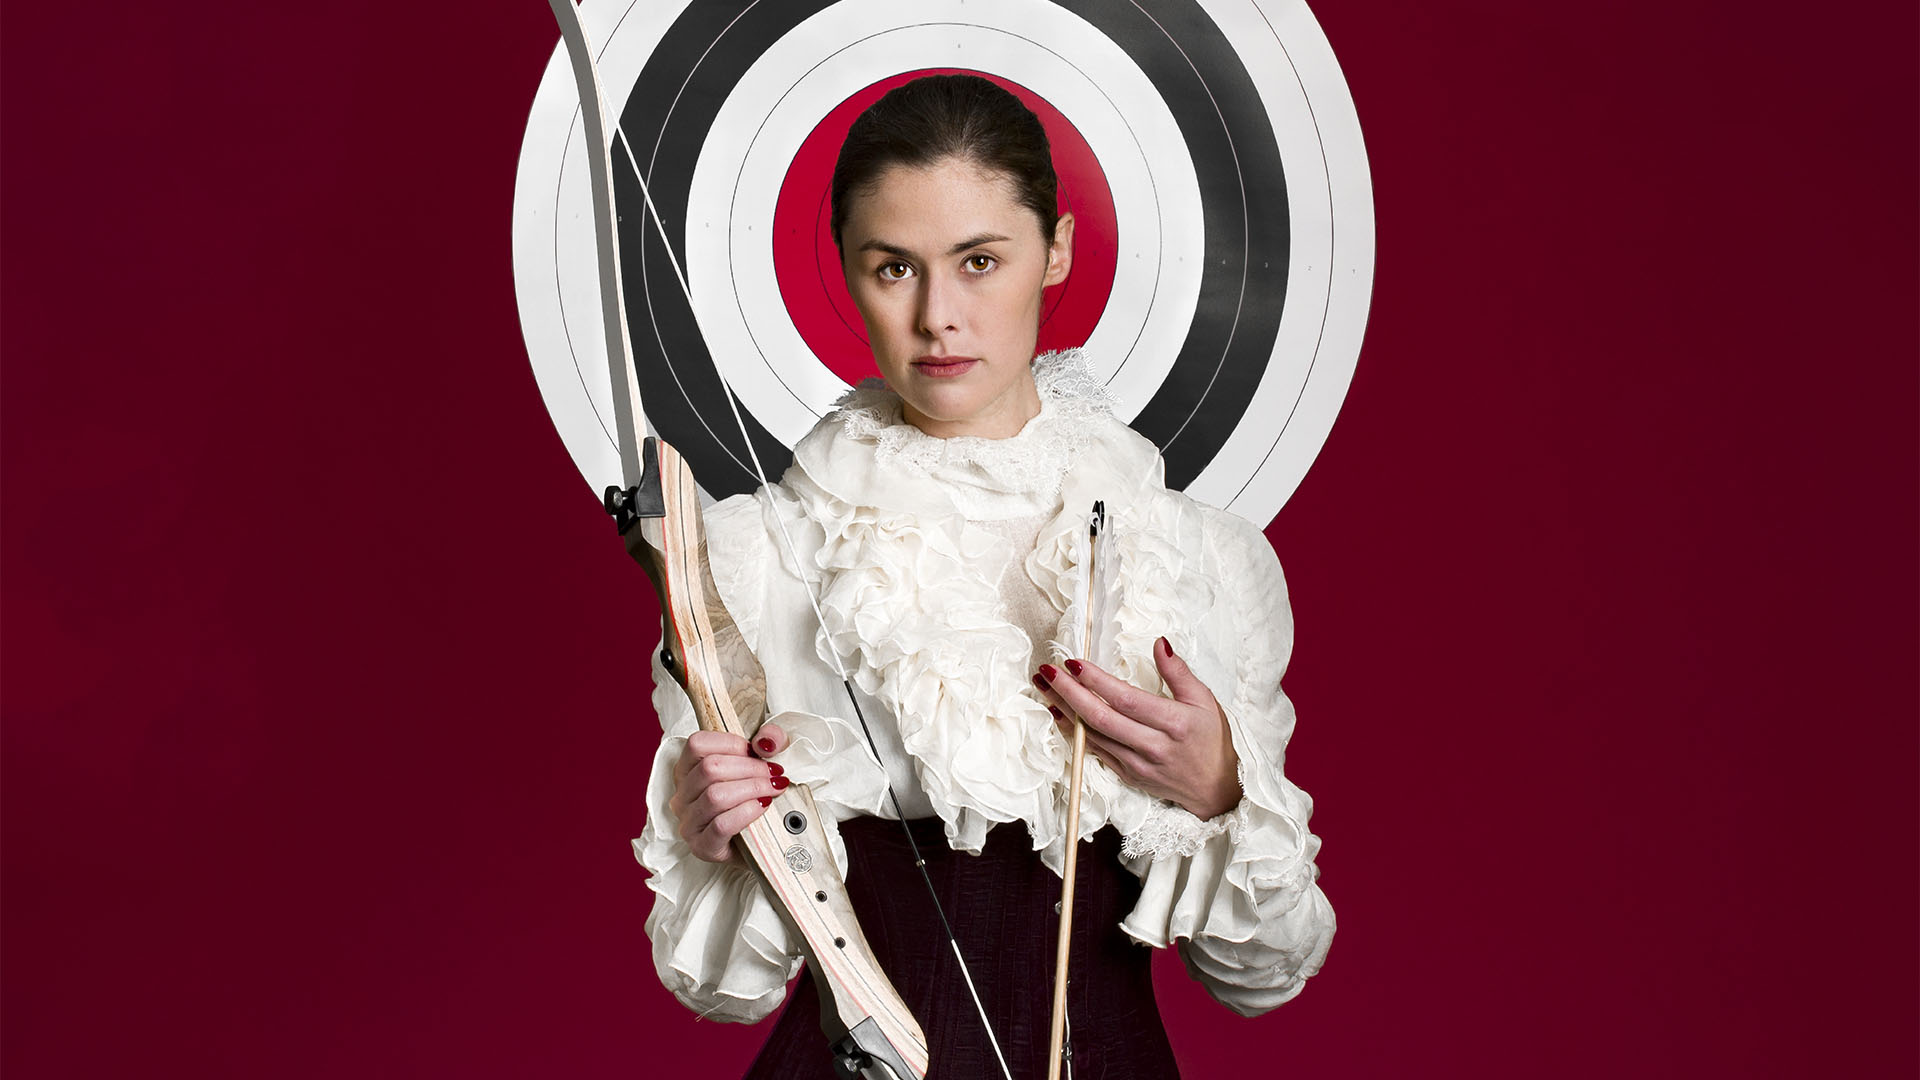 emma guardia archery with red background and target